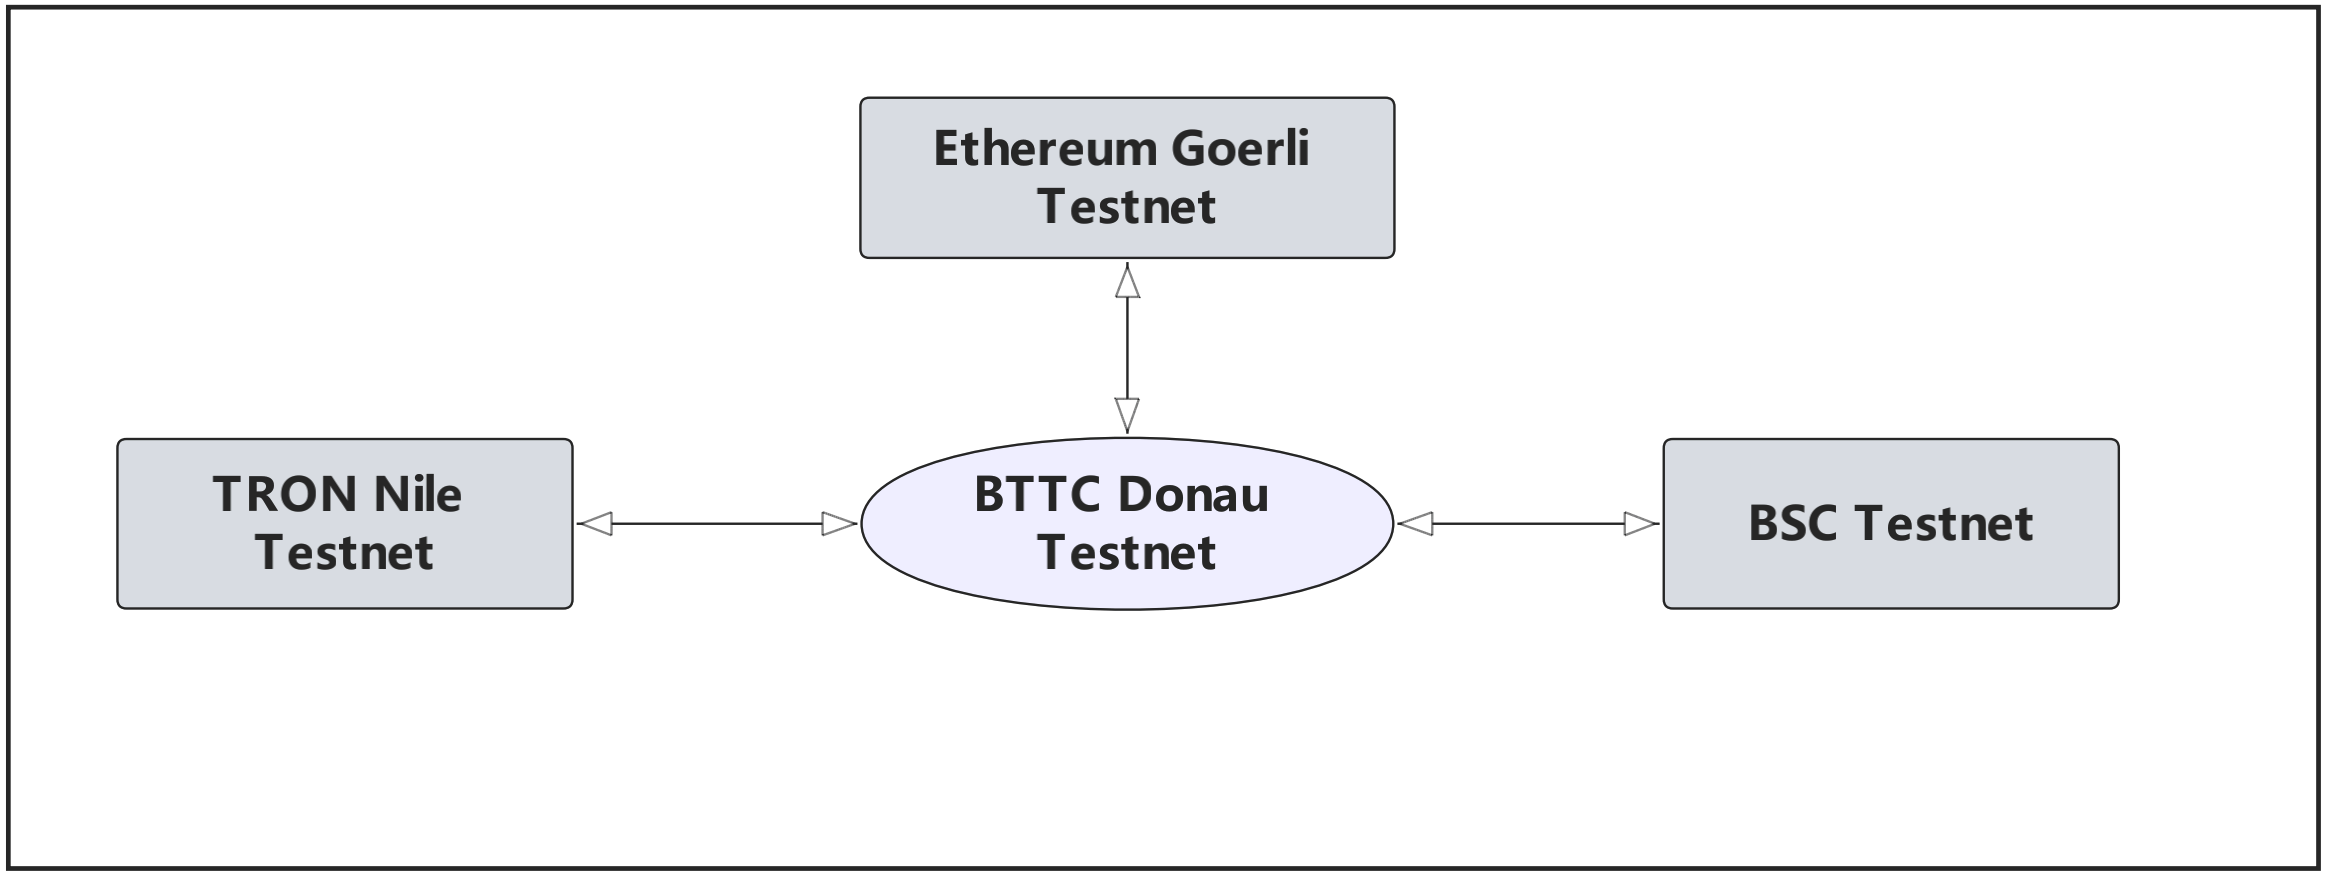 BTTC is a layer-2 network of TRON/BSC/Ethereum network. The following is the network structure of the BTTC testnet